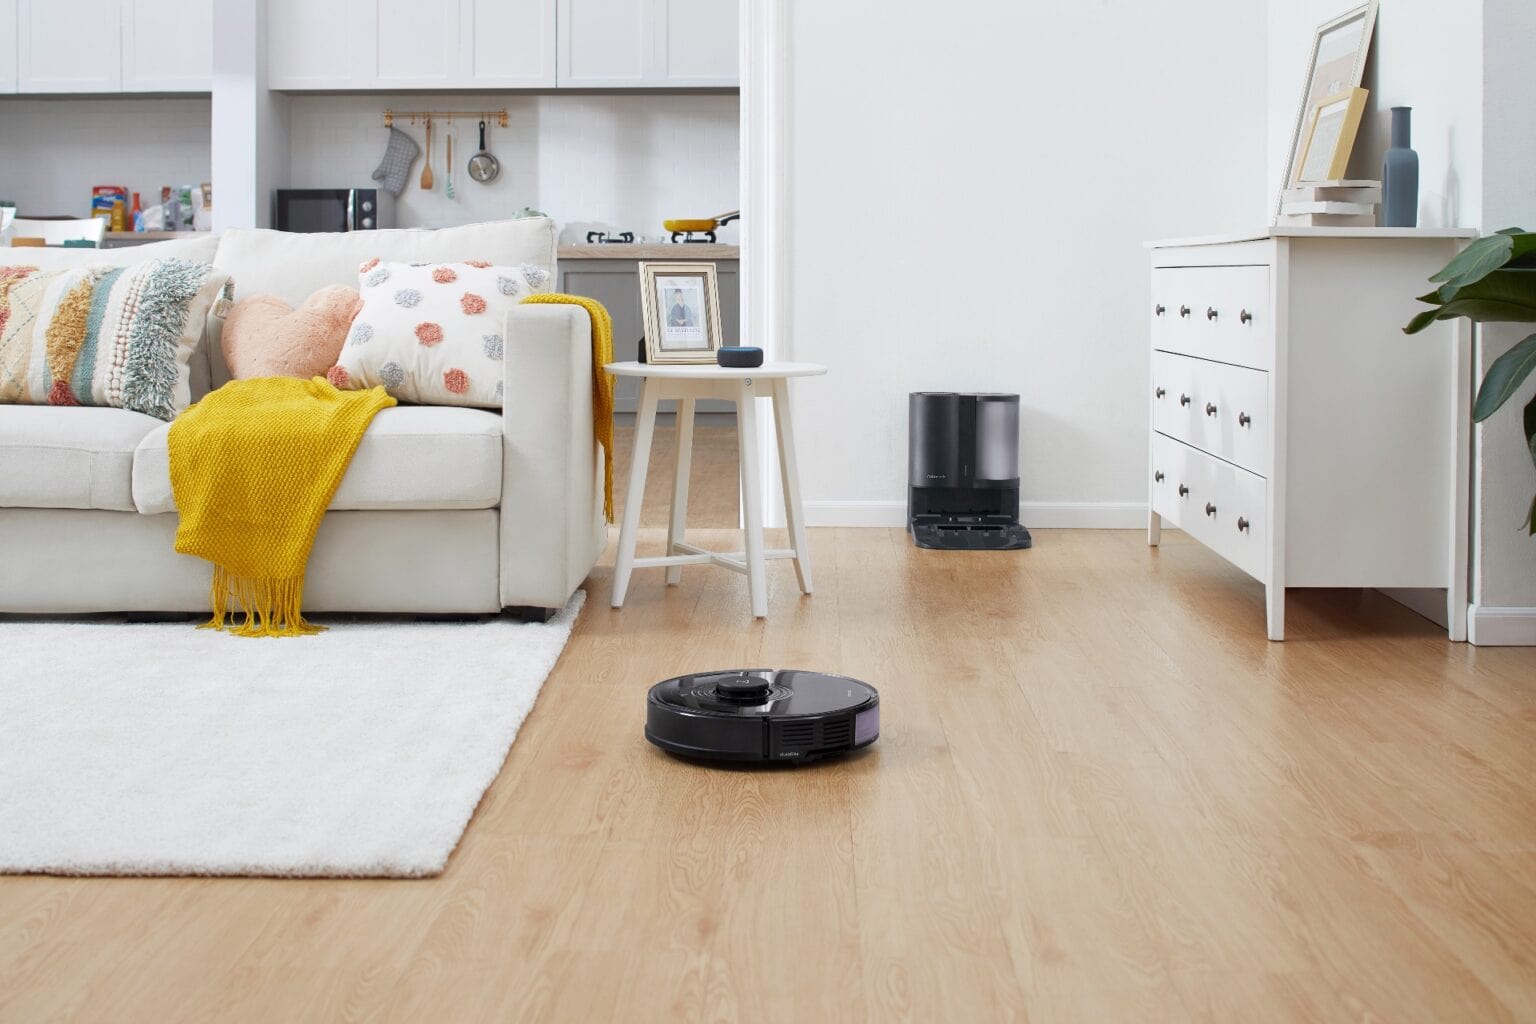 The Roborock S7+ can automatically switch from mopping floors to vacuuming carpets.